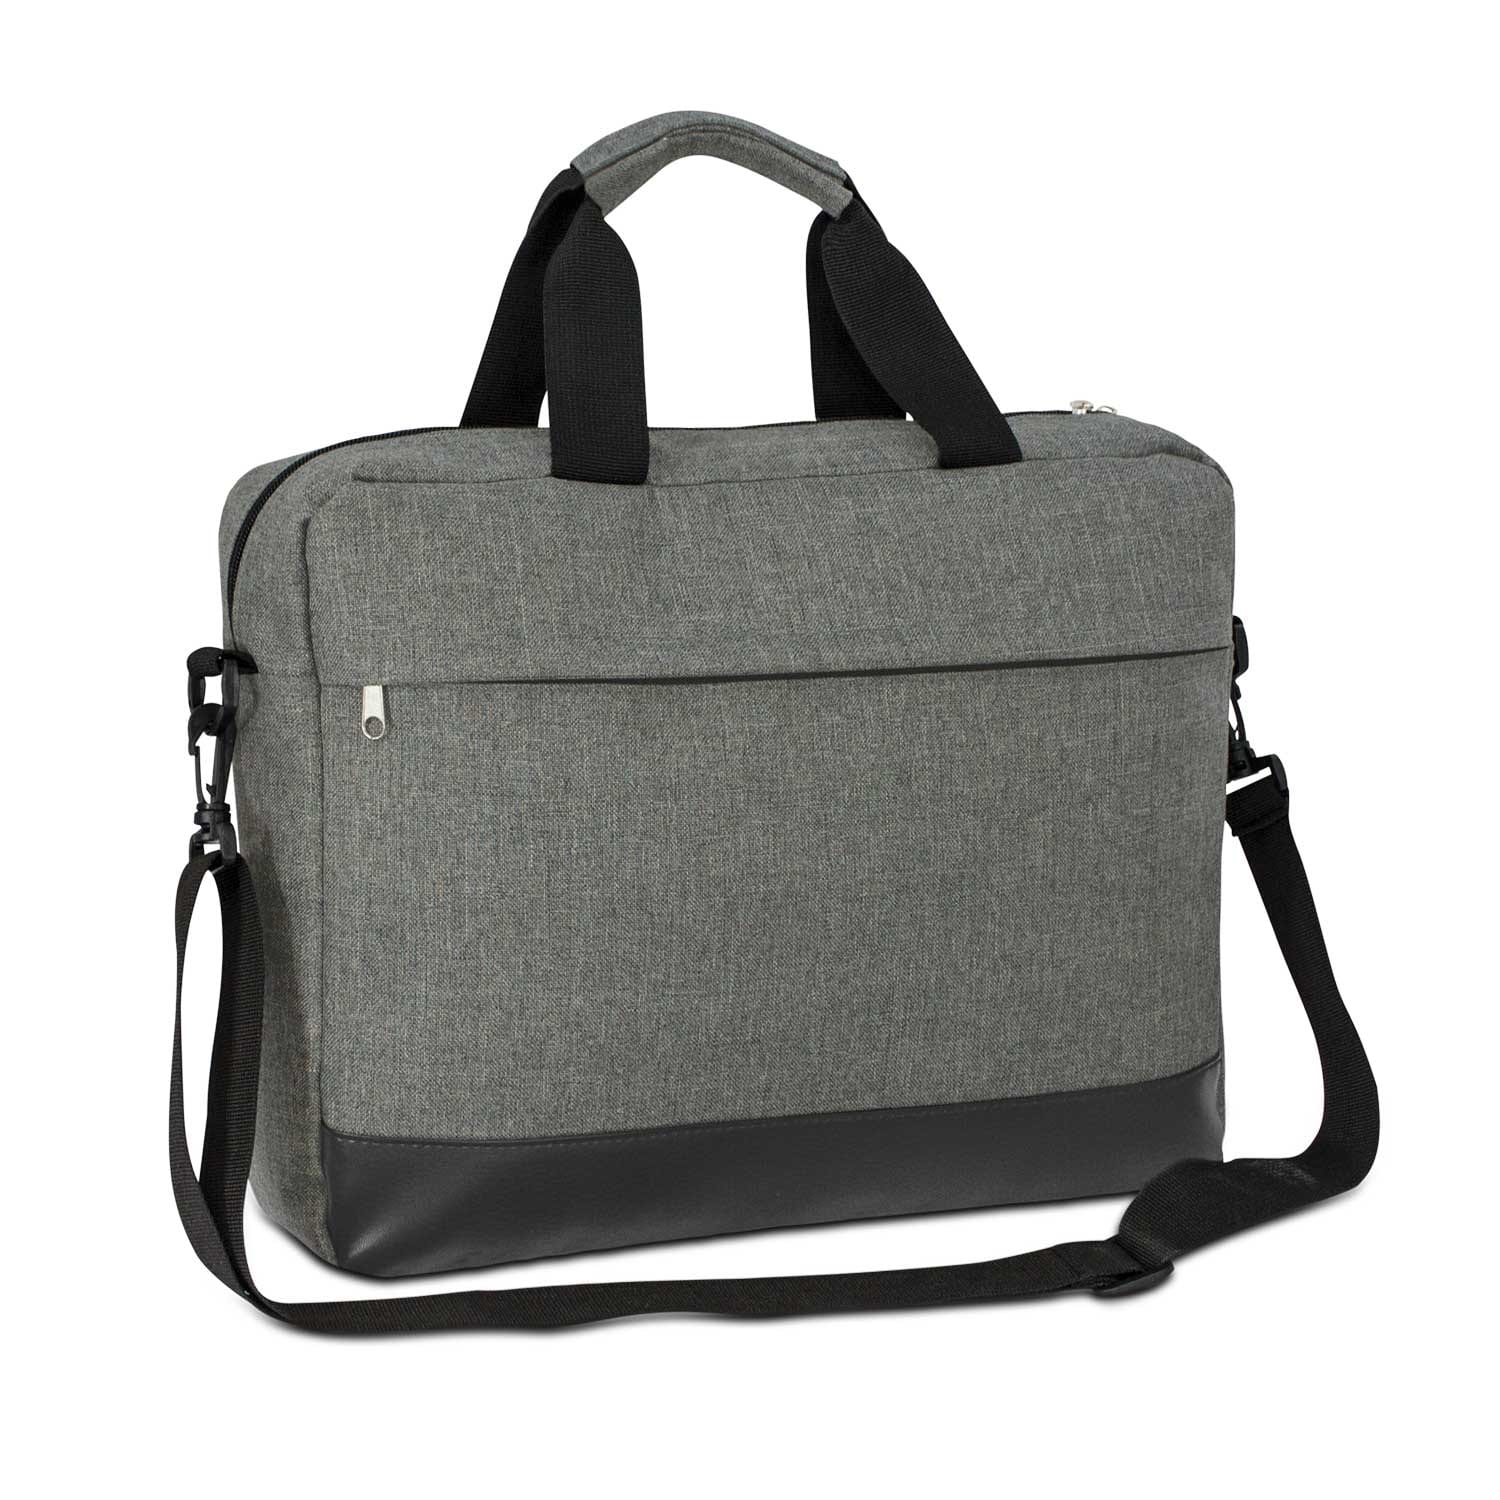 Conference Bags Herald Business Satchel business